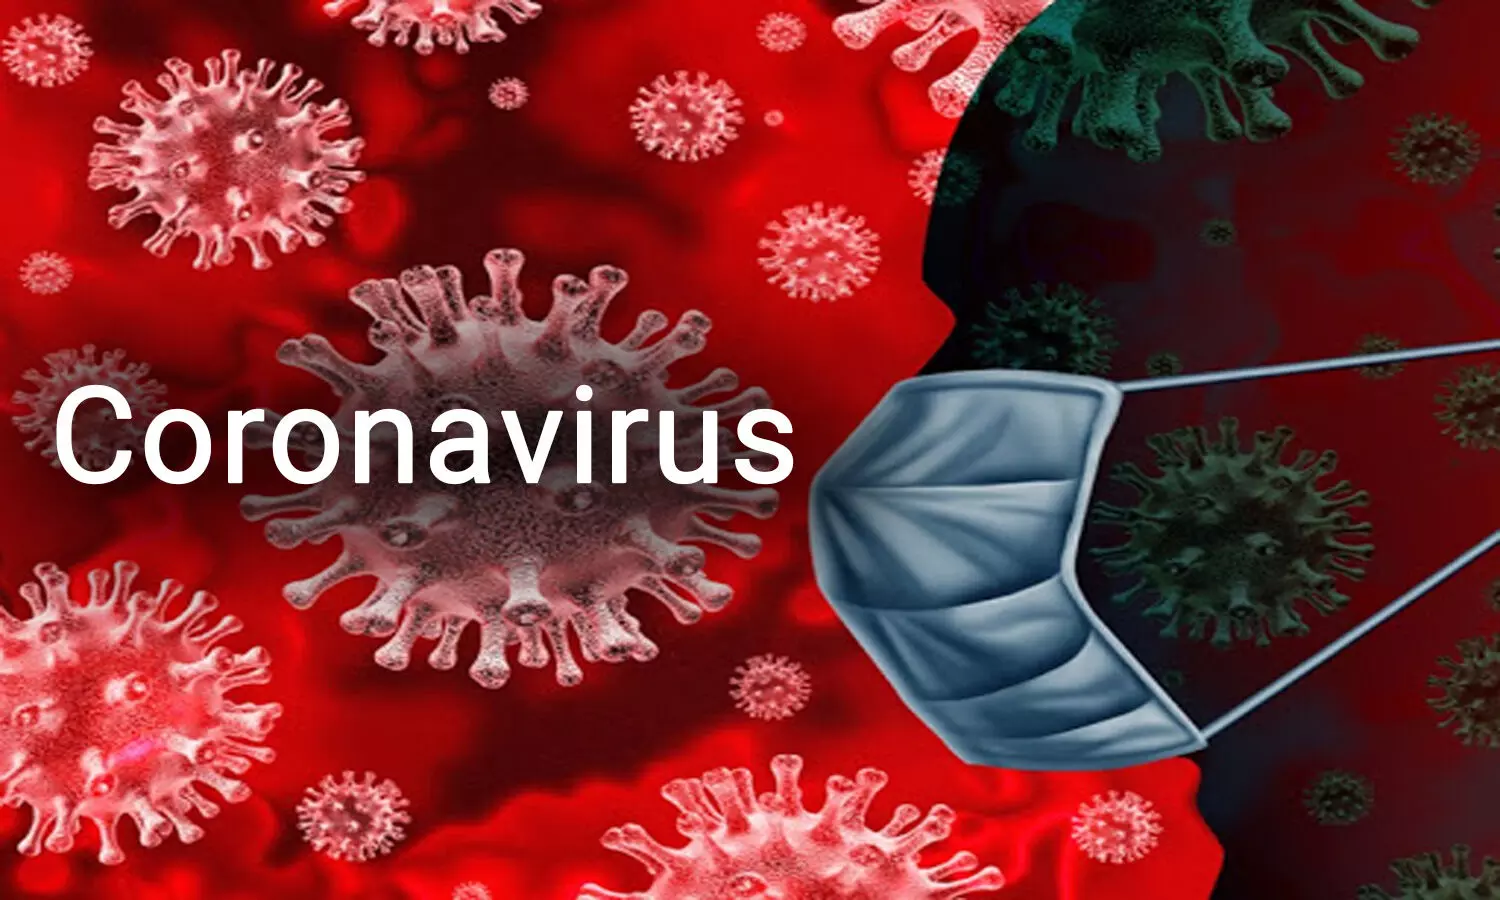 Coronavirus Update: Health ministry confirms another 24 cases in India, PM Modi says no to public gatherings